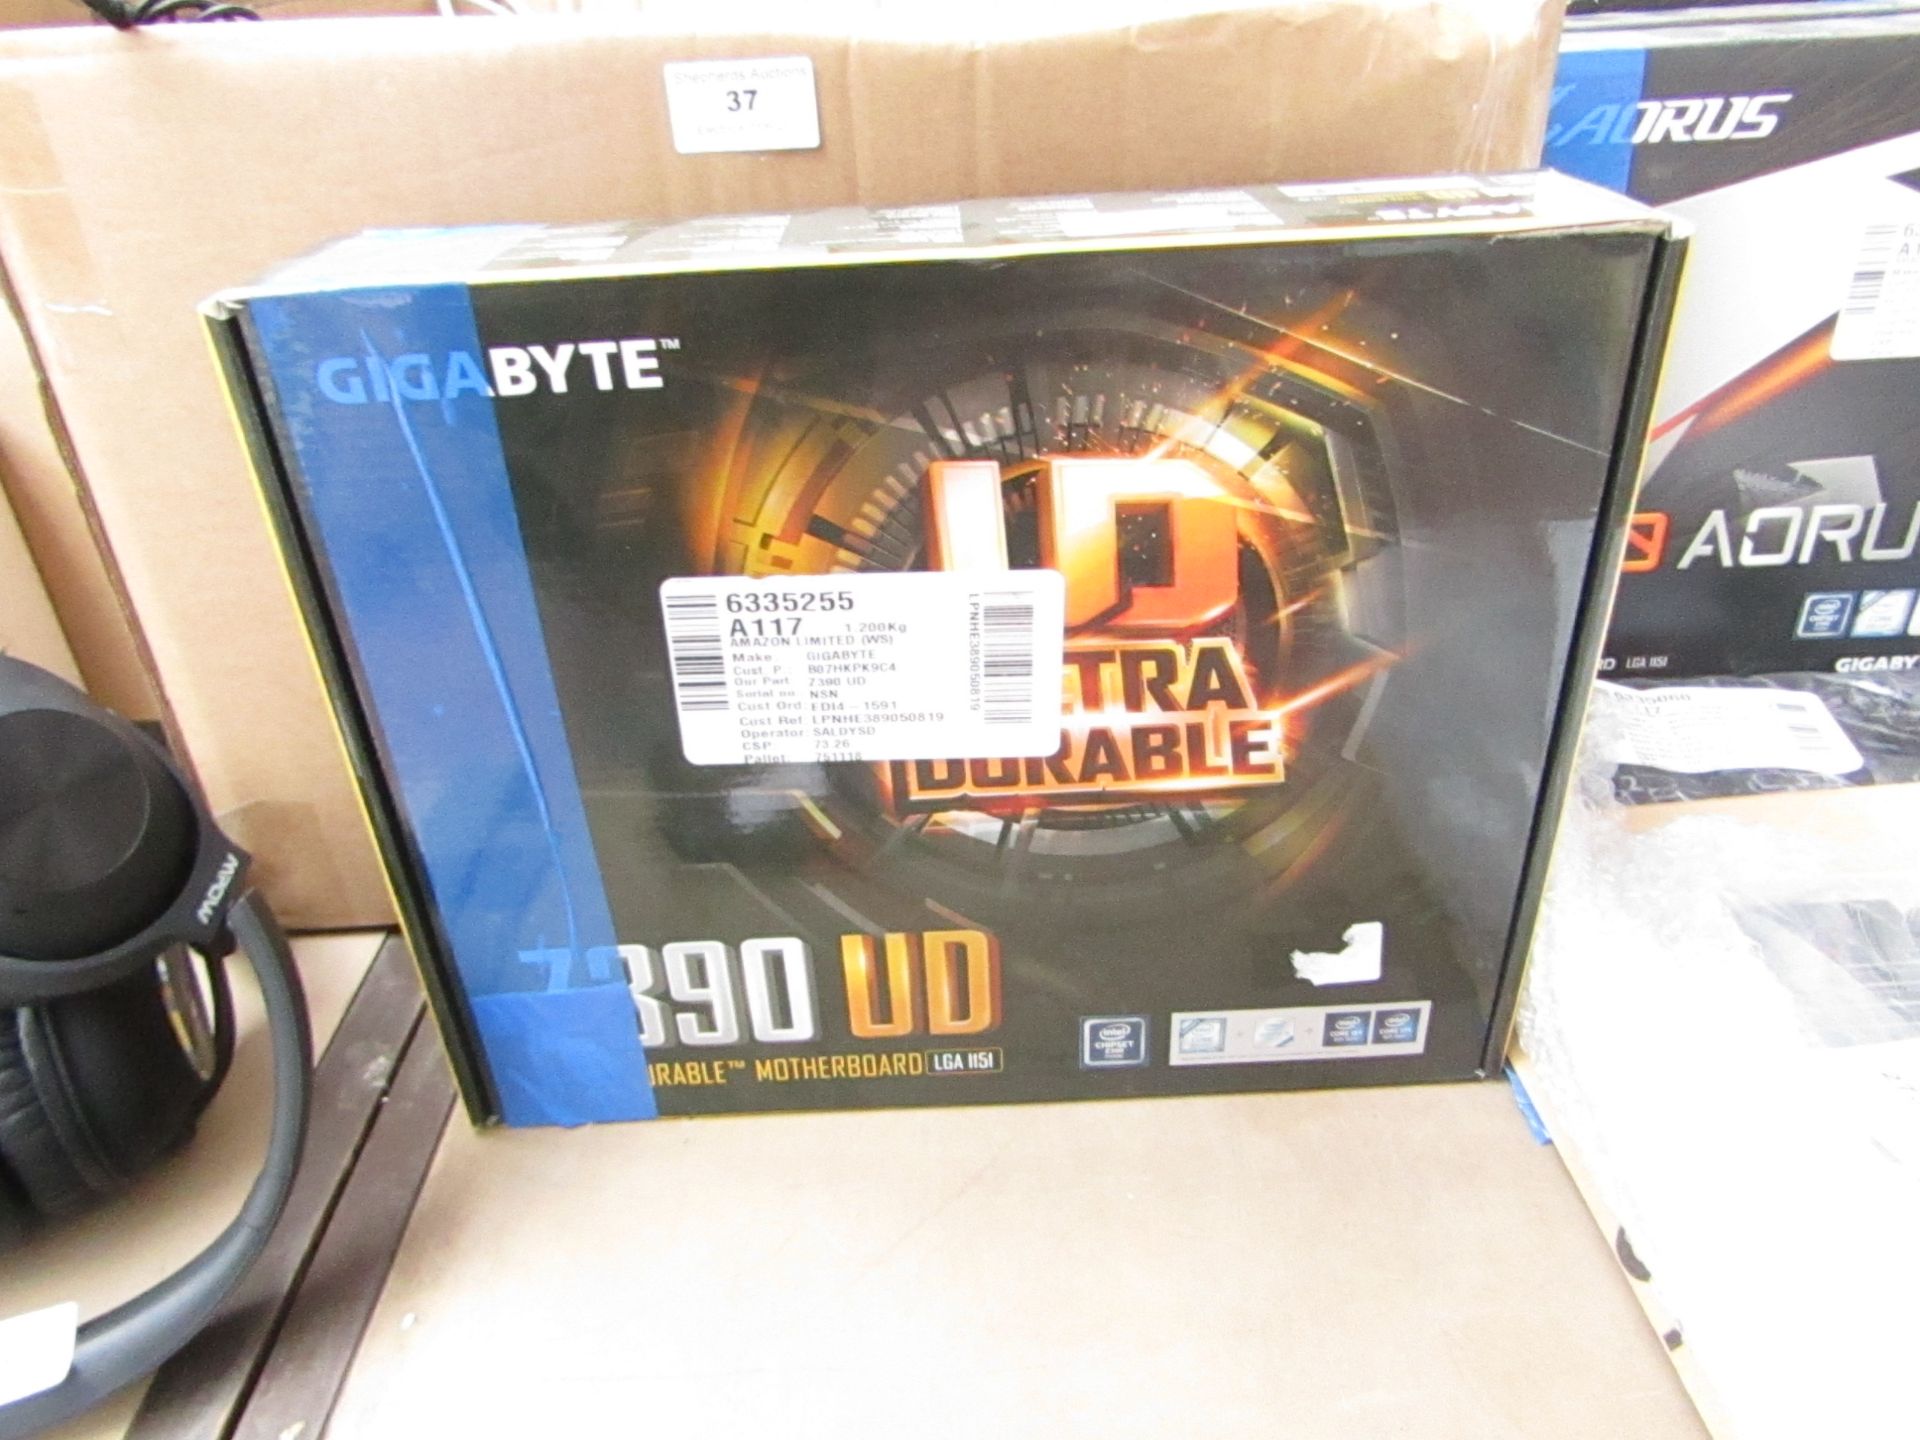 Gigabyte 7390 UD Ultra Durable Motherboard. Boxed but Untested. RRP œ159.99